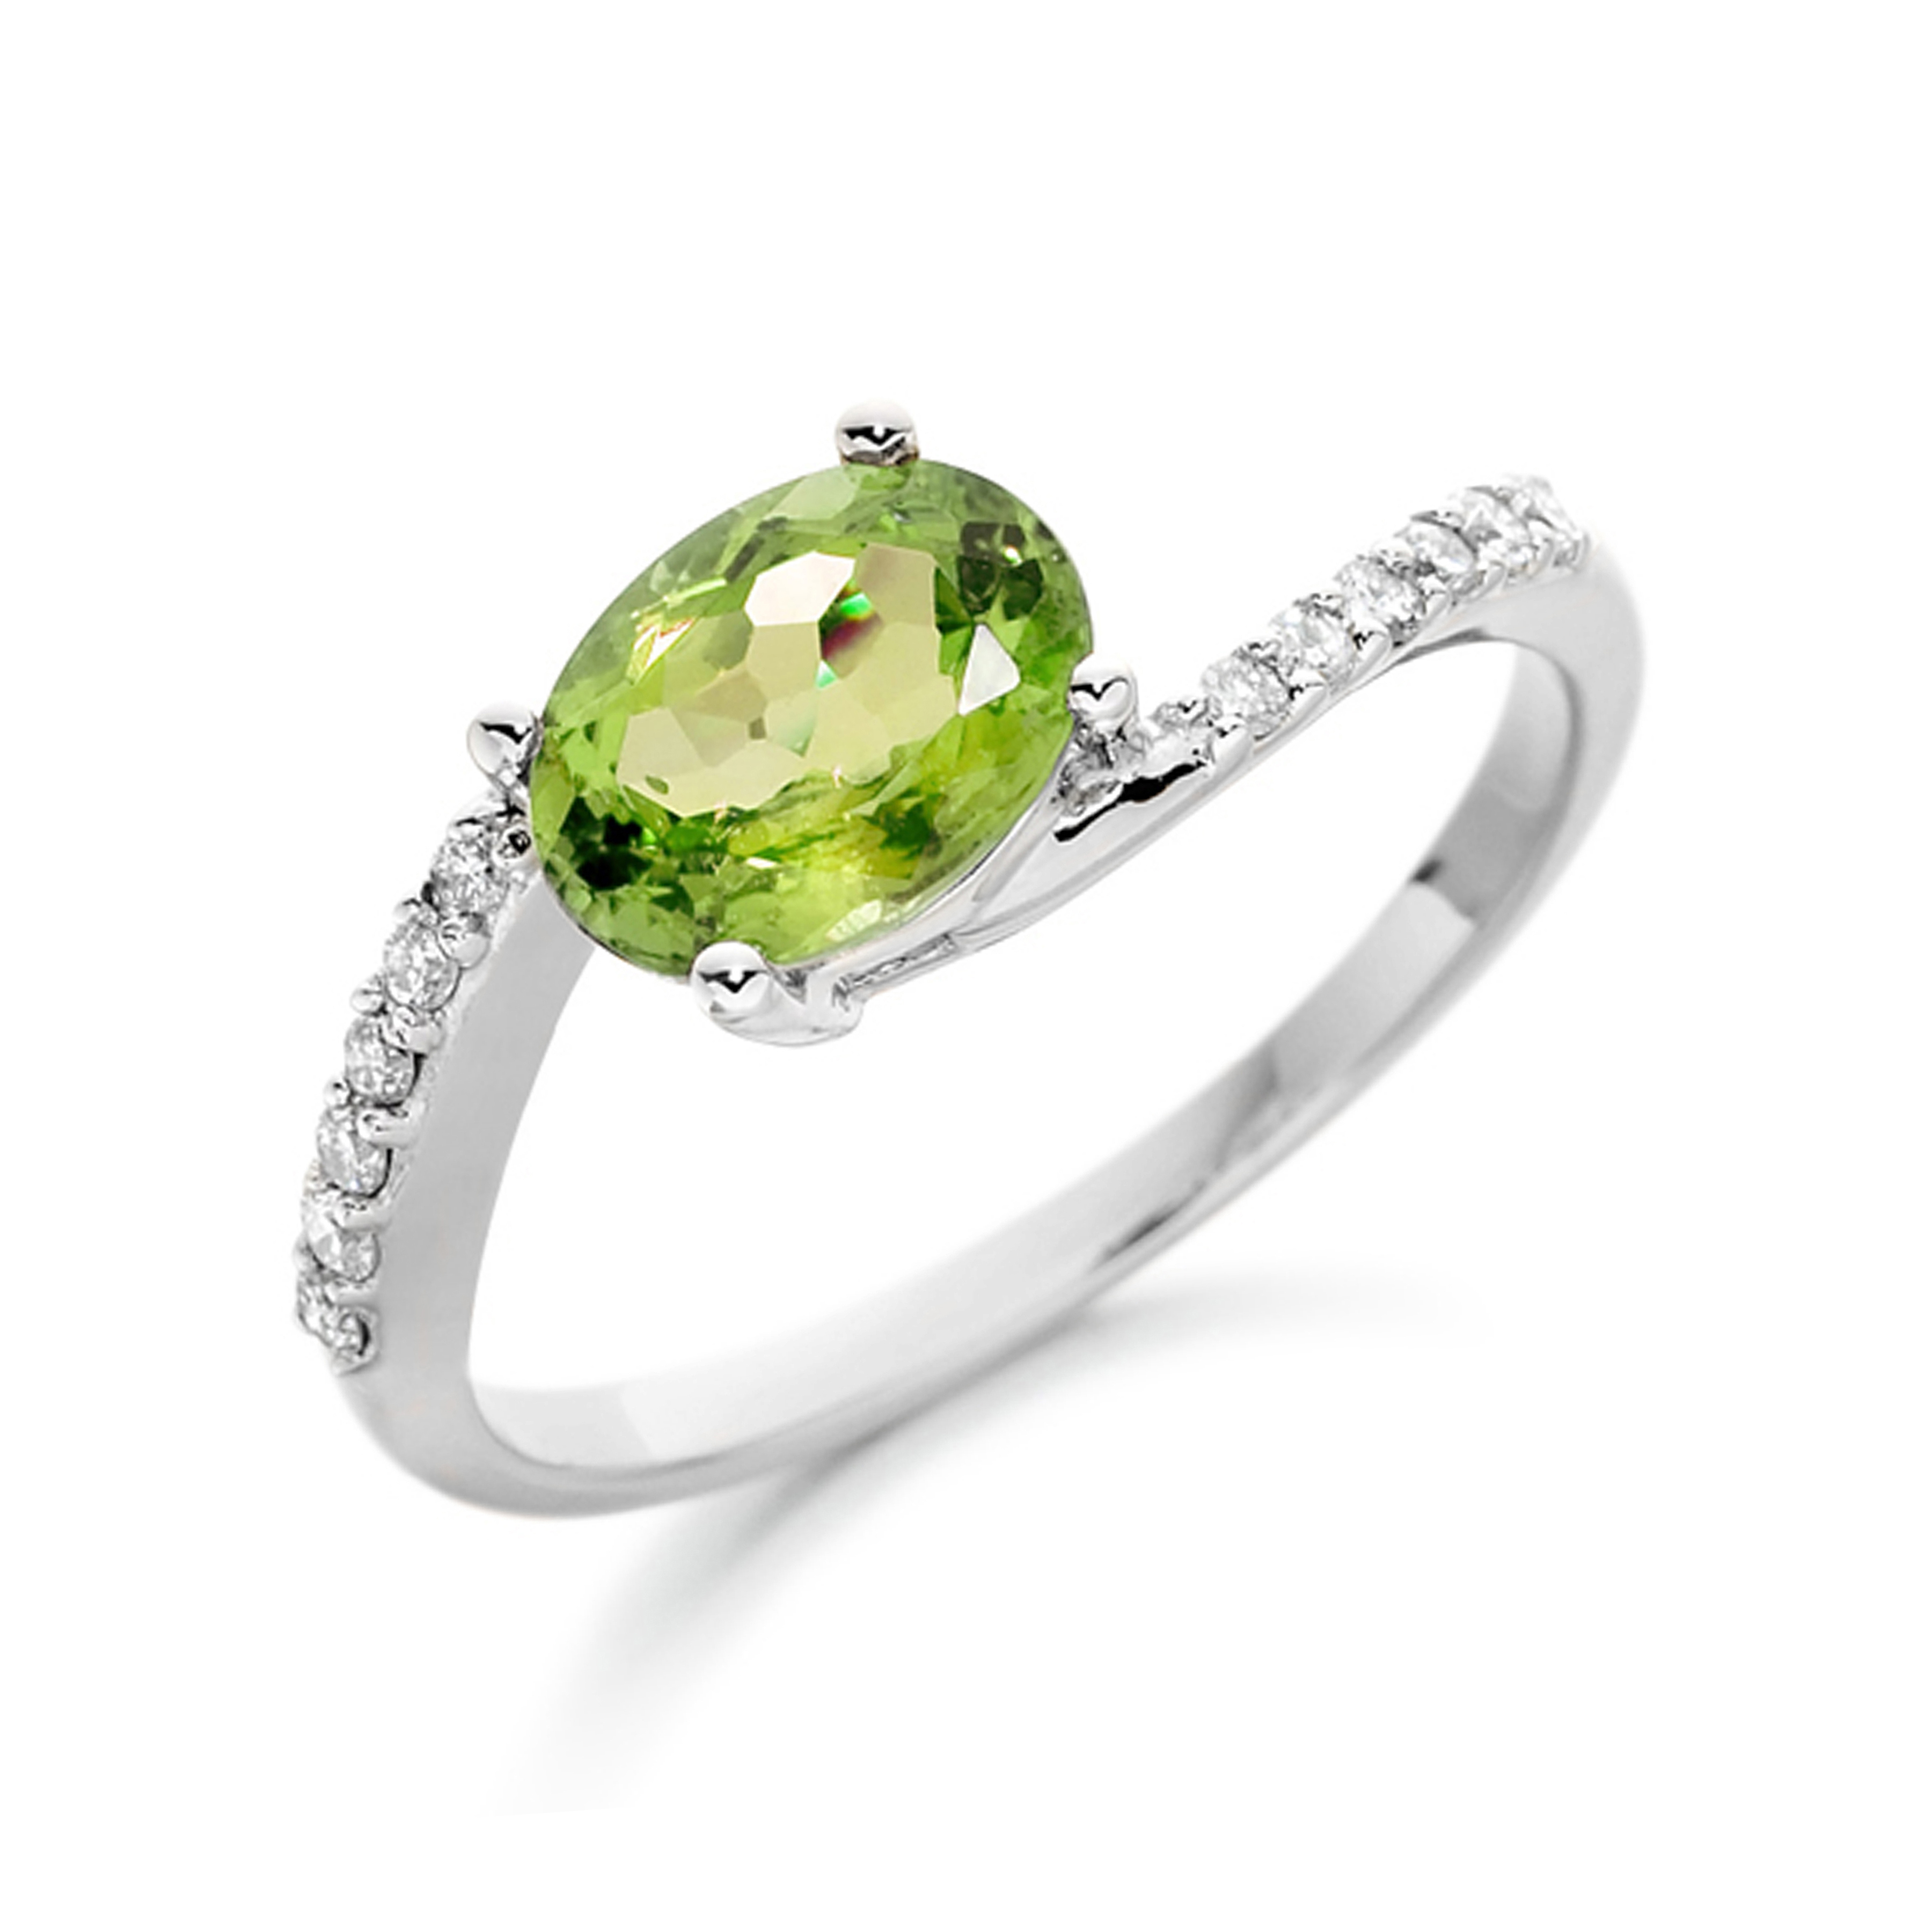 6X4mm Oval Peridot Stones On Shoulder Diamond And Gemstone Engagement Ring